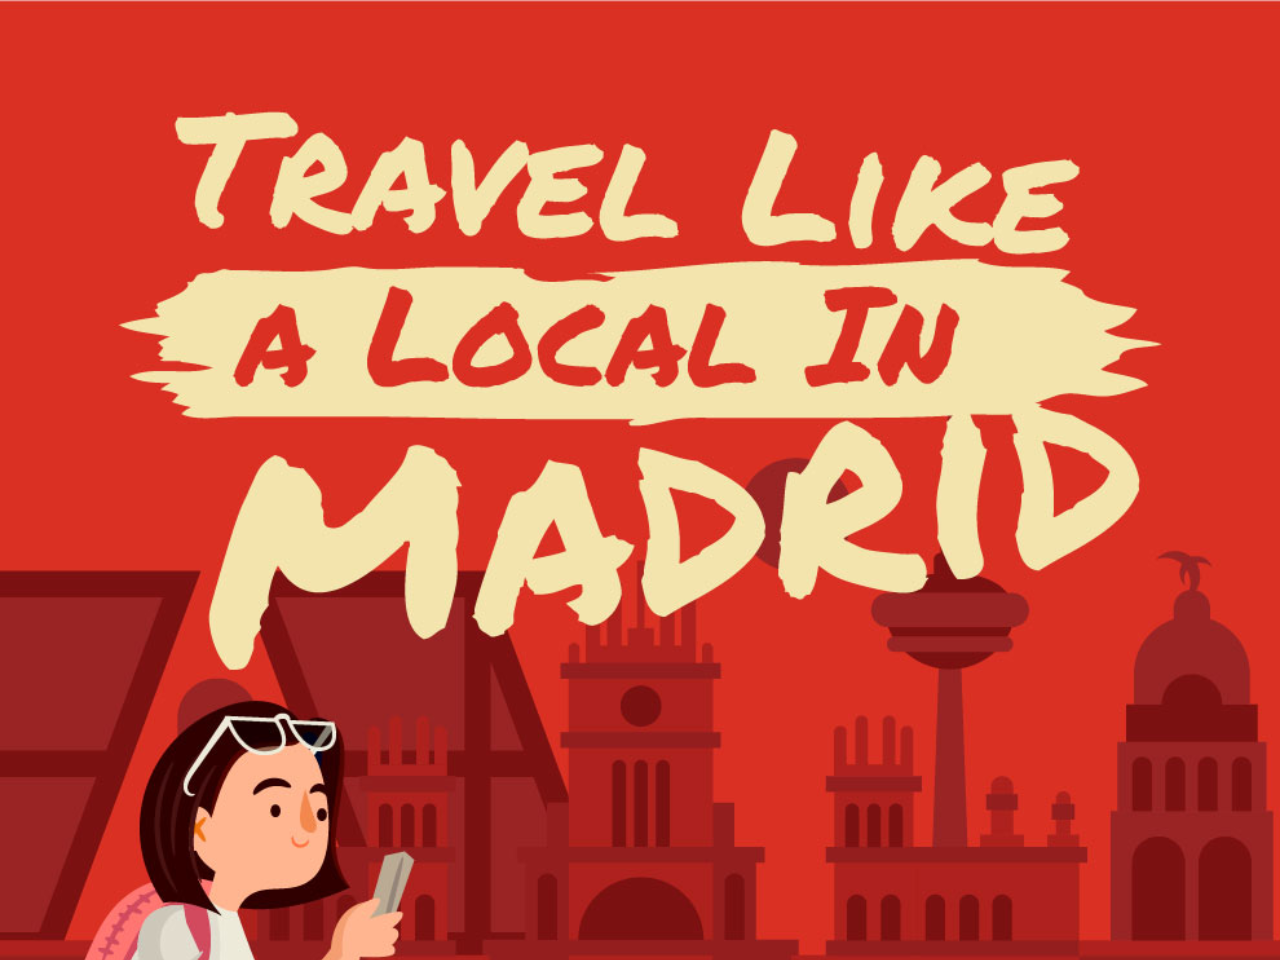 Travel Like A Local In Madrid 2018 [InfoGraphic]